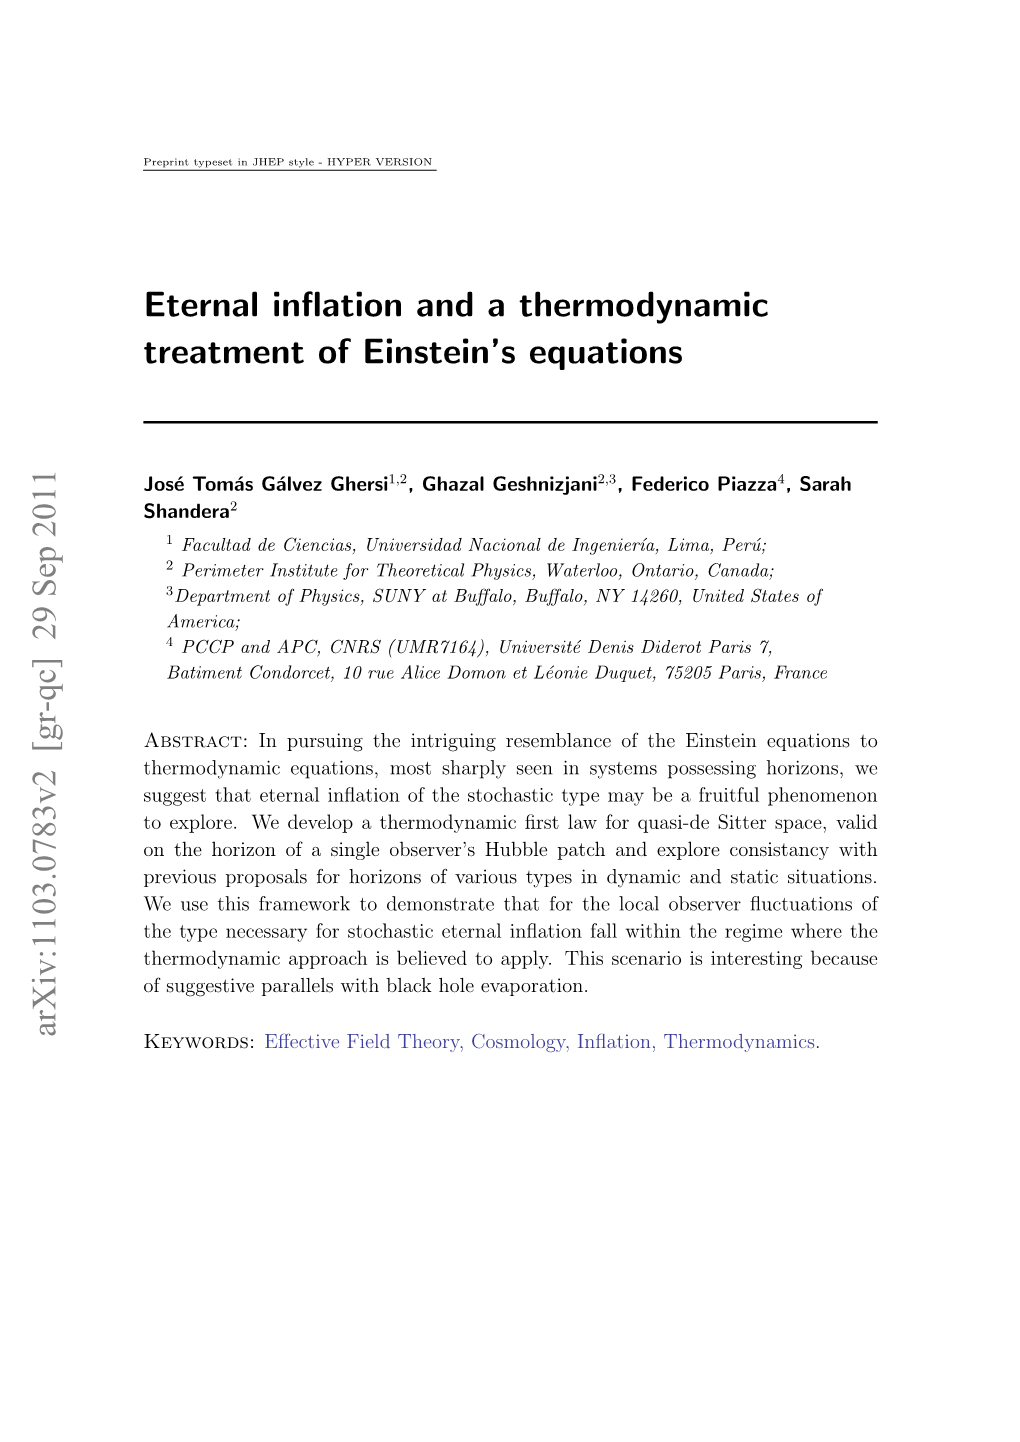 Eternal Inflation and a Thermodynamic Treatment of Einstein's Equations